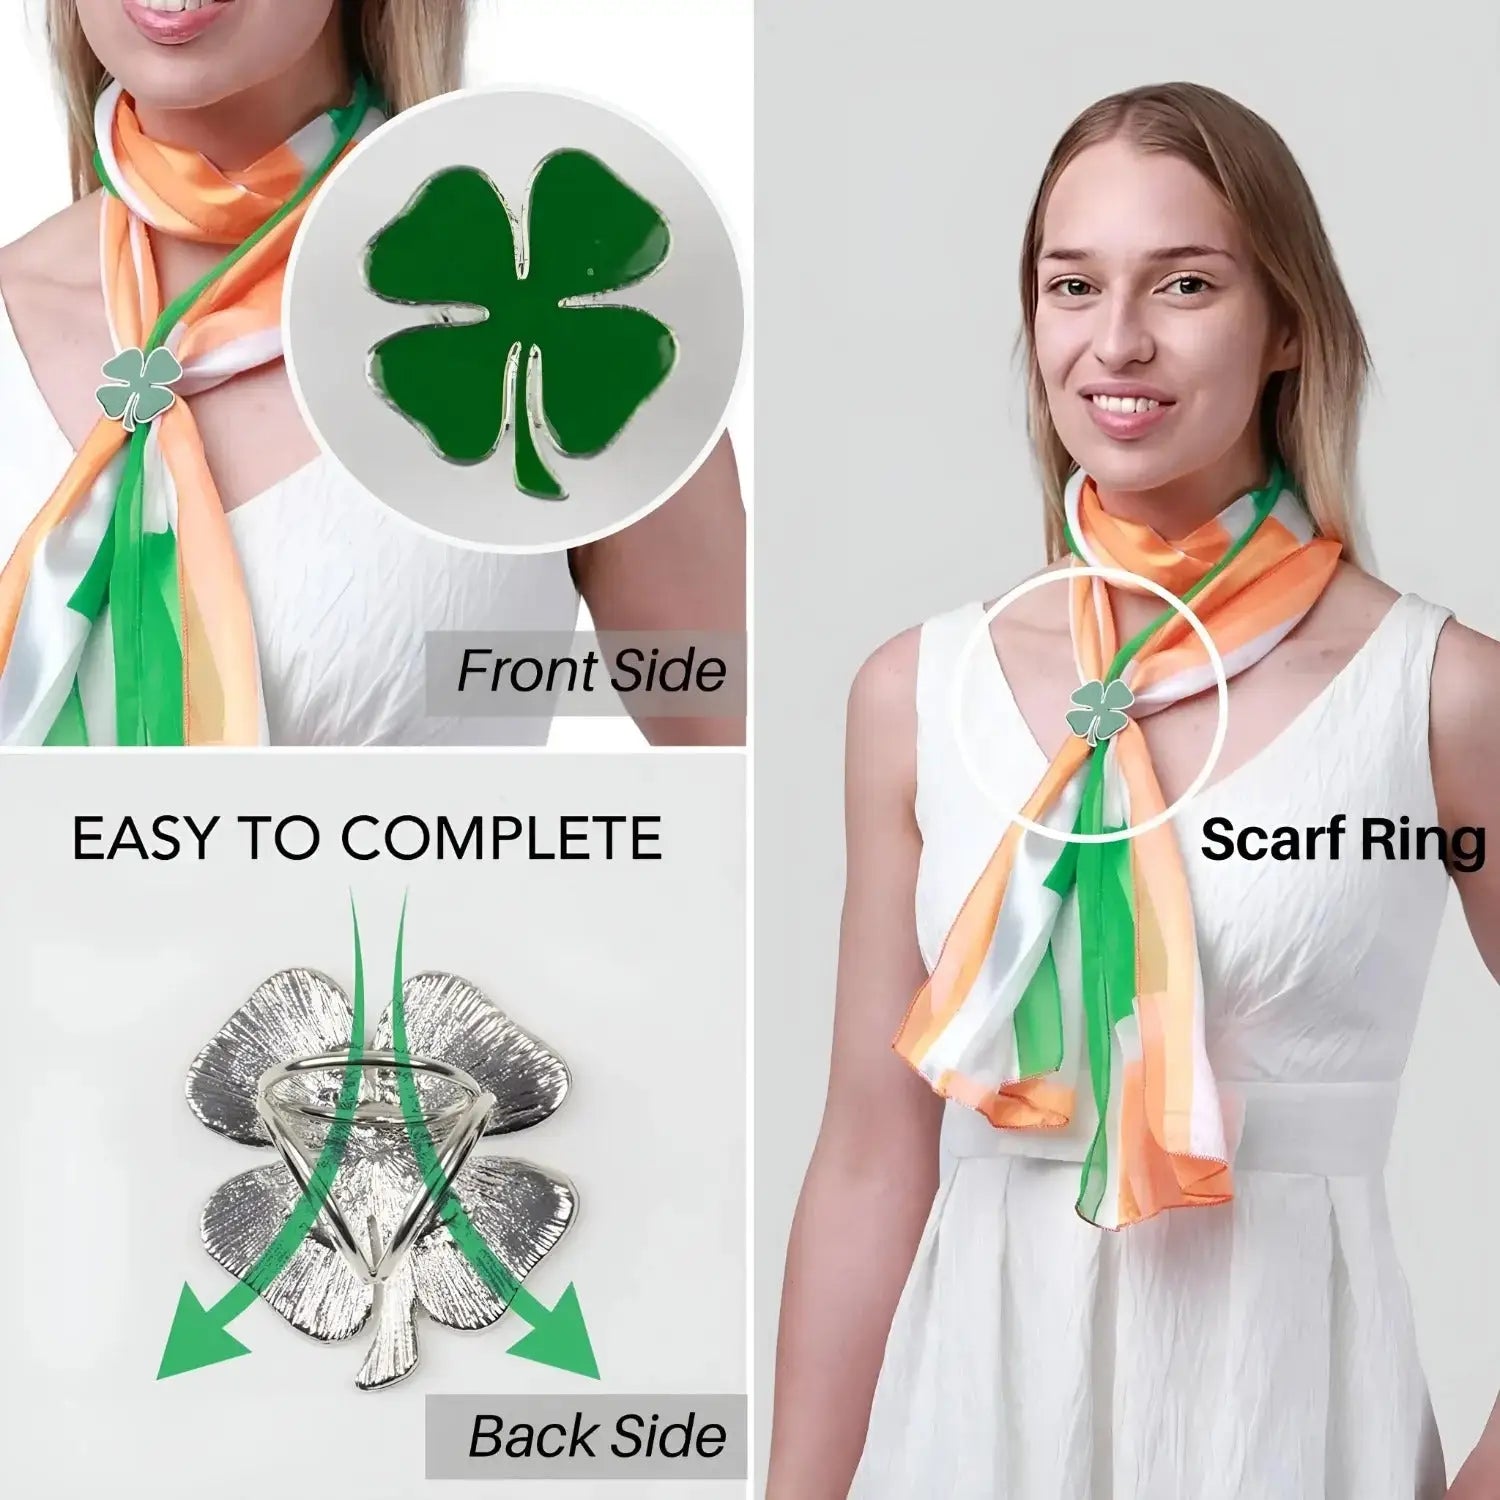 Irish flag satin scarf for St. Patrick’s Day worn by a girl